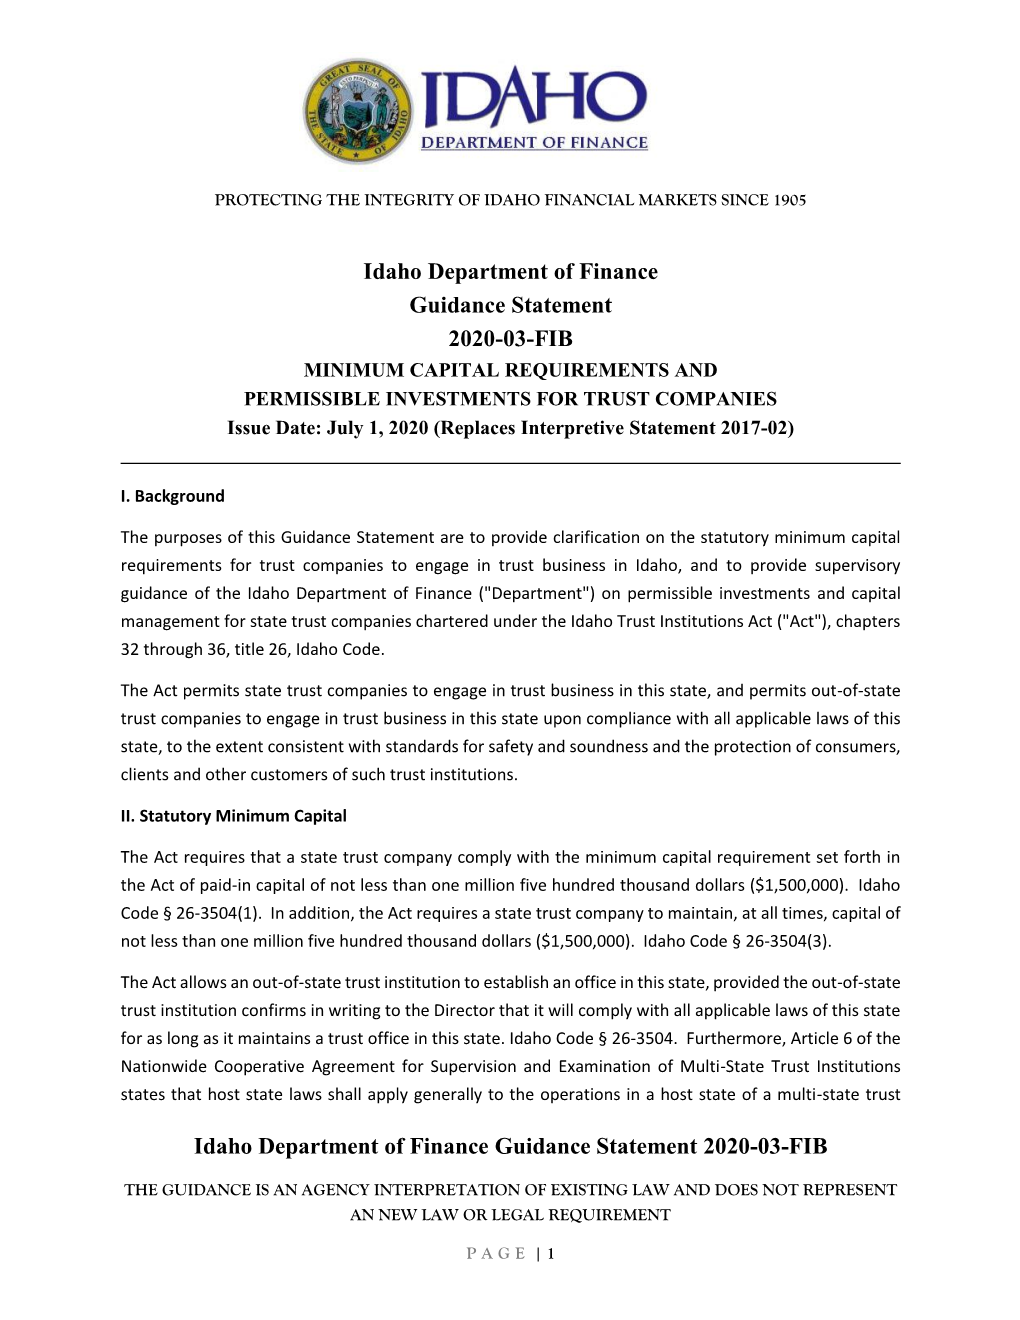 MINIMUM CAPITAL REQUIREMENTS and PERMISSIBLE INVESTMENTS for TRUST COMPANIES Issue Date: July 1, 2020 (Replaces Interpretive Statement 2017-02)